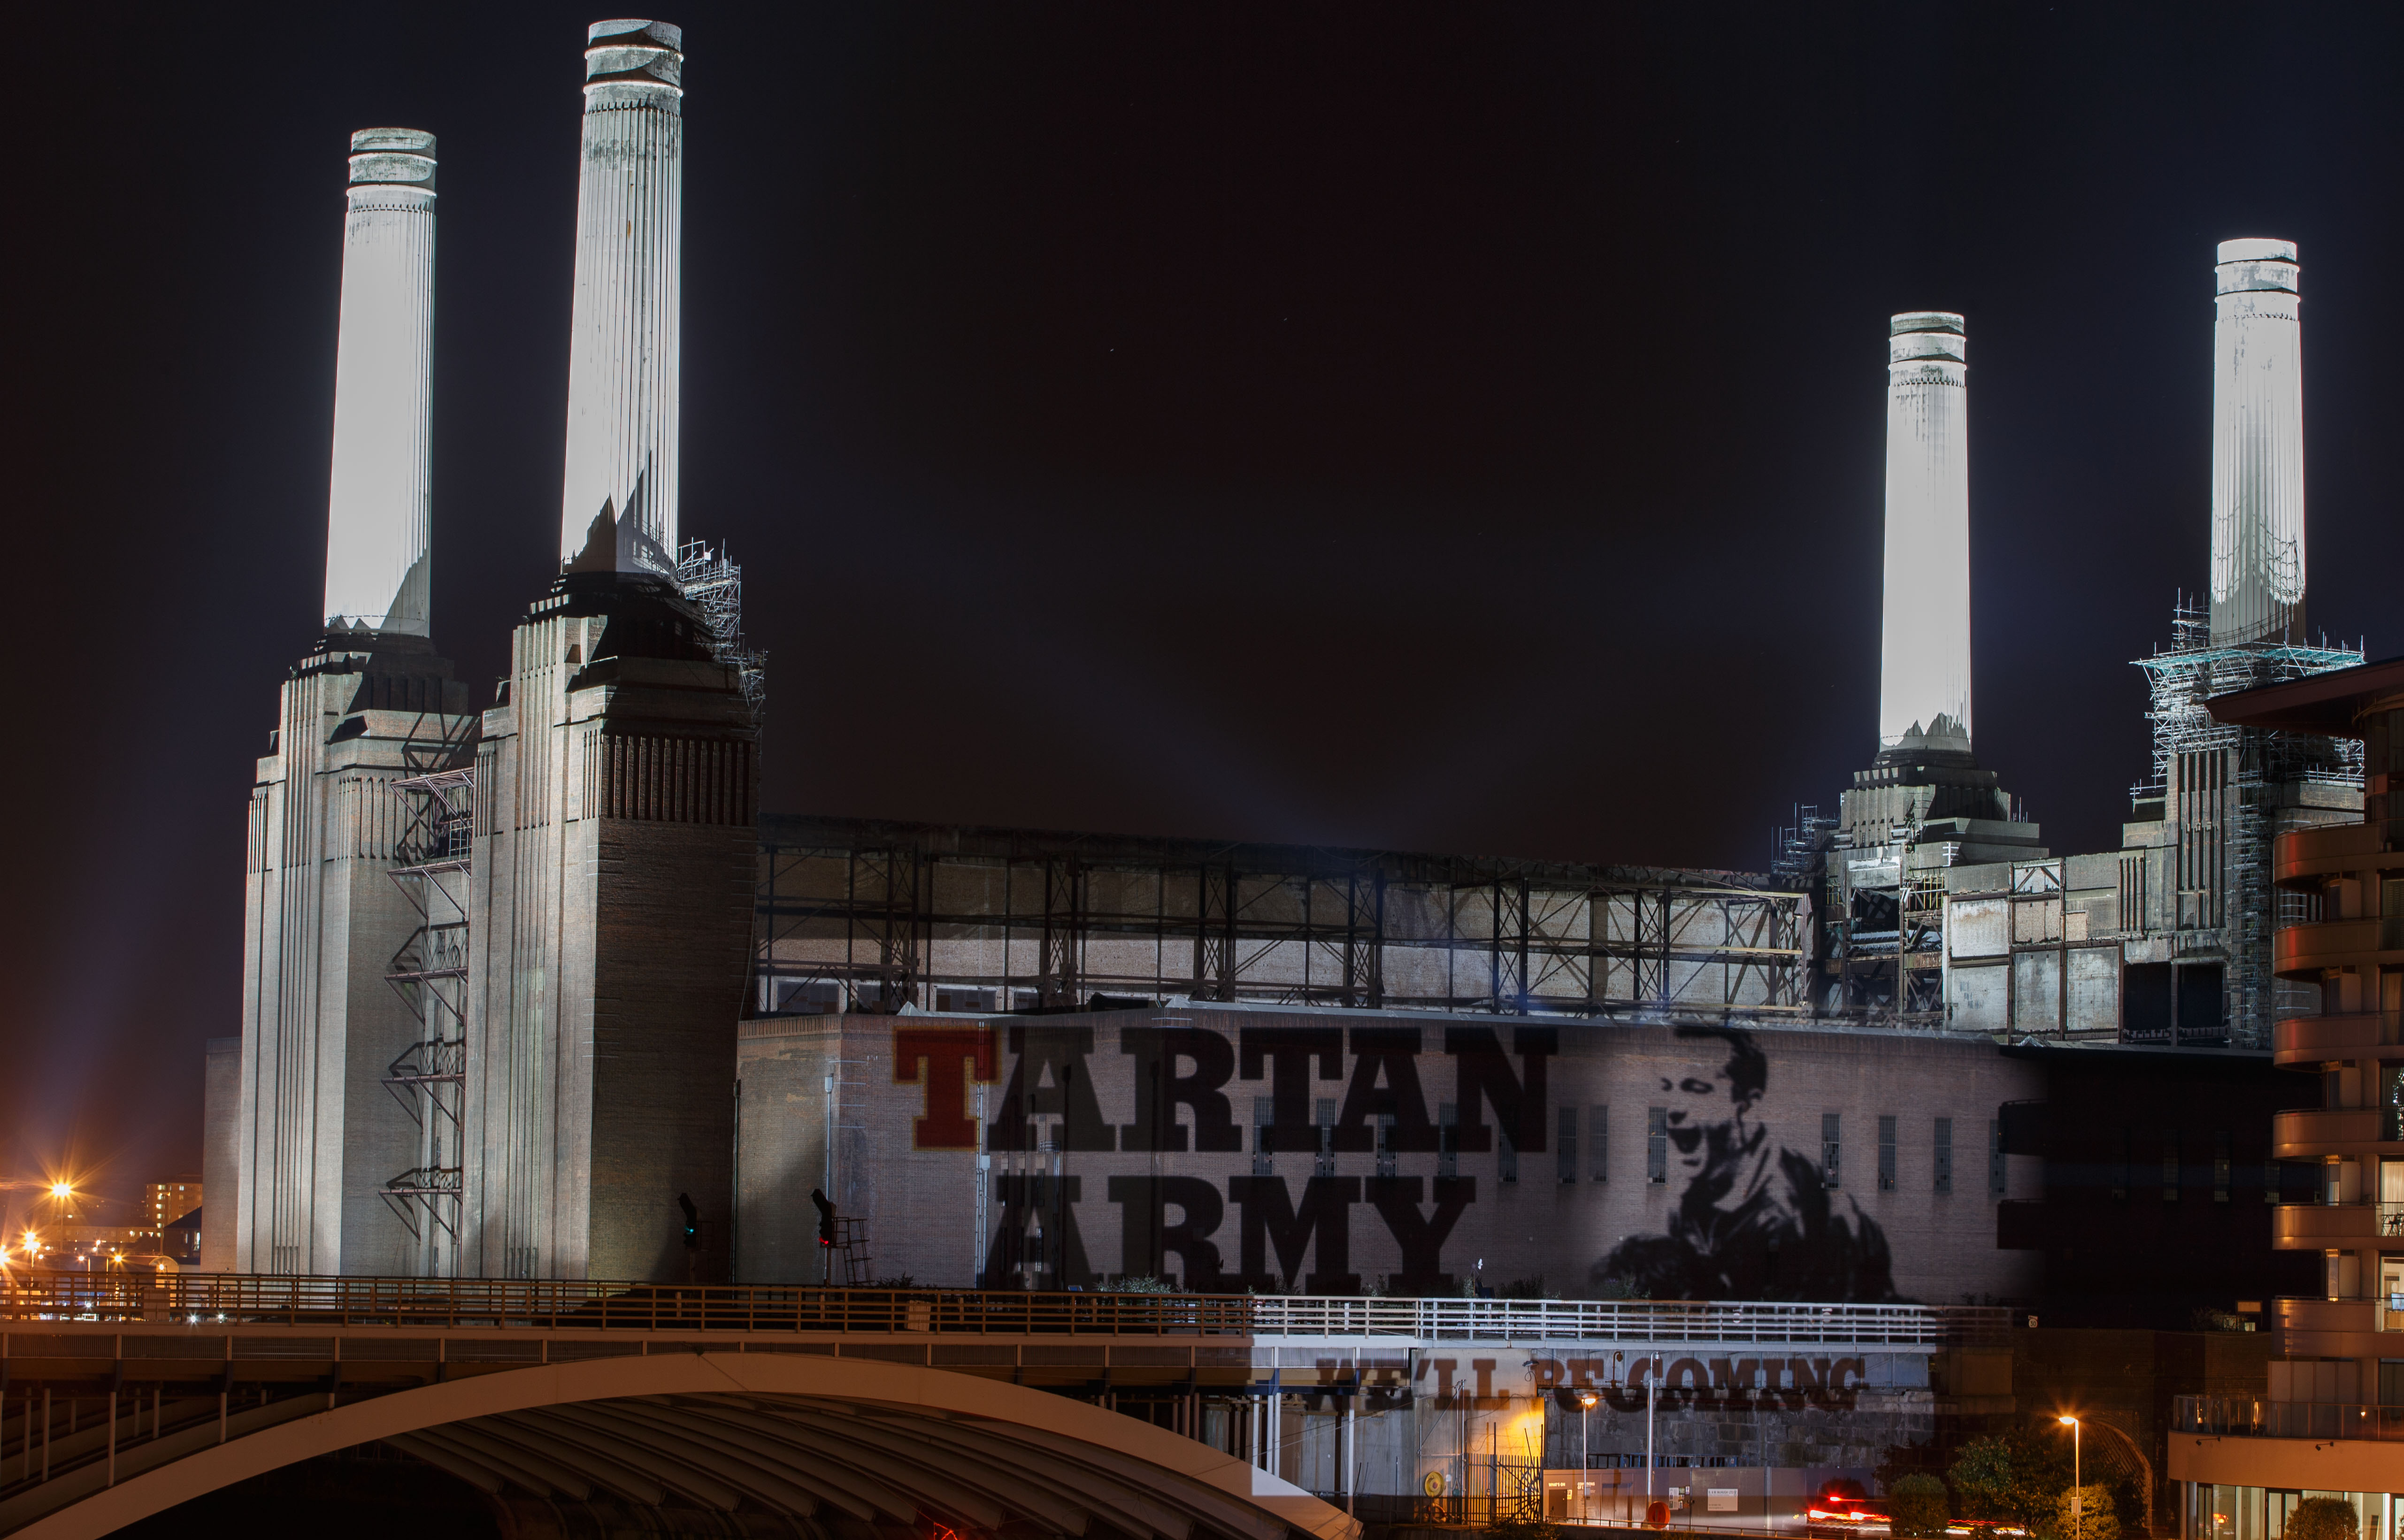 Tennent's Building Projection Battersea Power Station